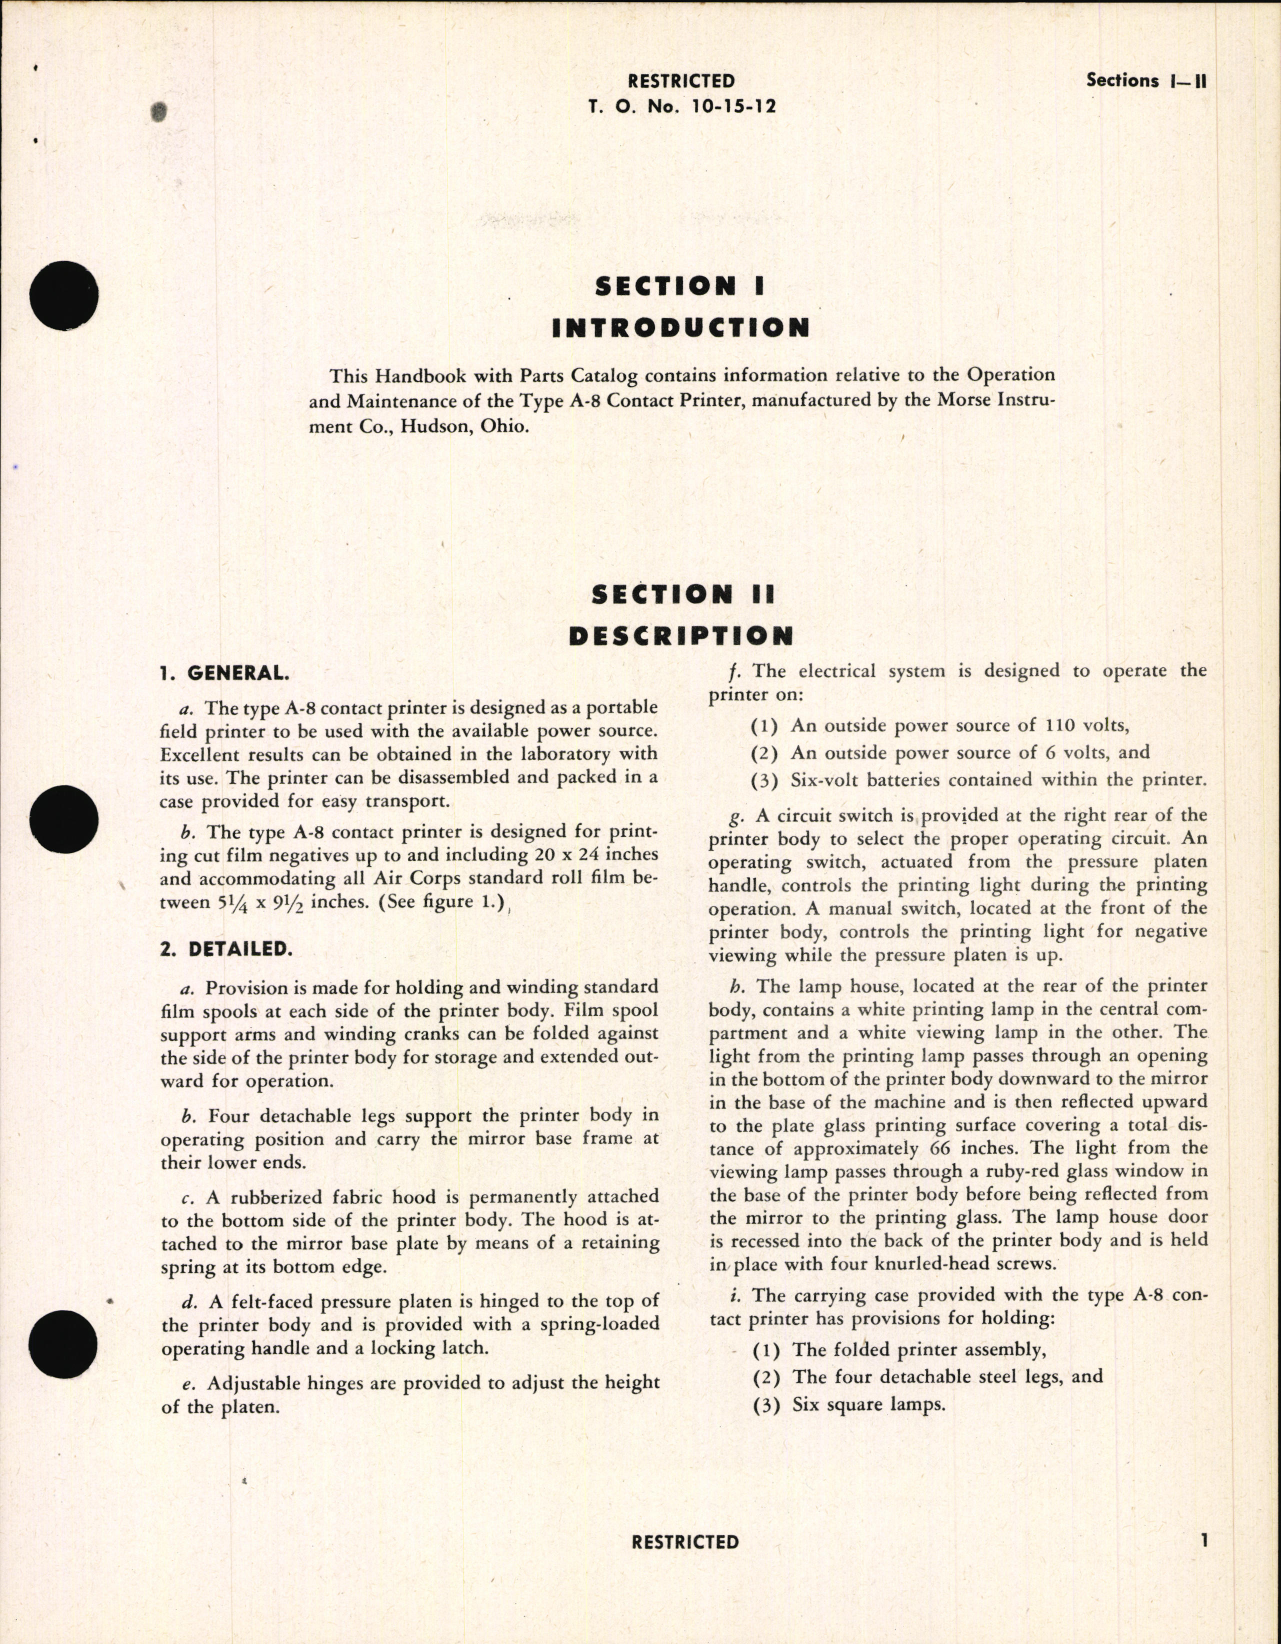 Sample page 5 from AirCorps Library document: Operation and Service Instructions with Parts Catalog for Type A-8 Contact Printer